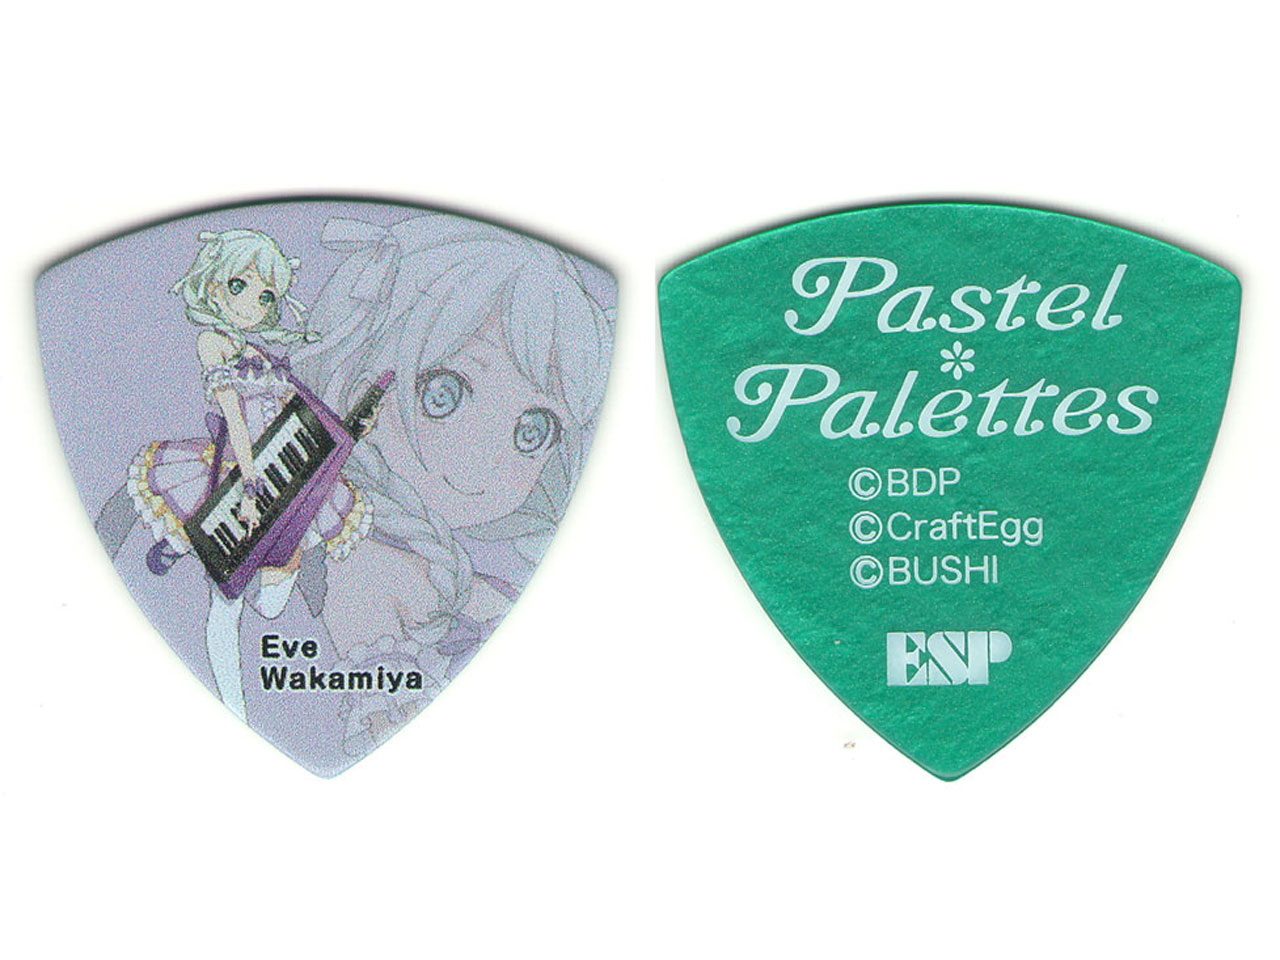 【ESP×BanG Dream!コラボピック】Pastel*Palettes Character Pick "若宮イヴ"10枚セット (GBP EVE PASTEL PALETTES)